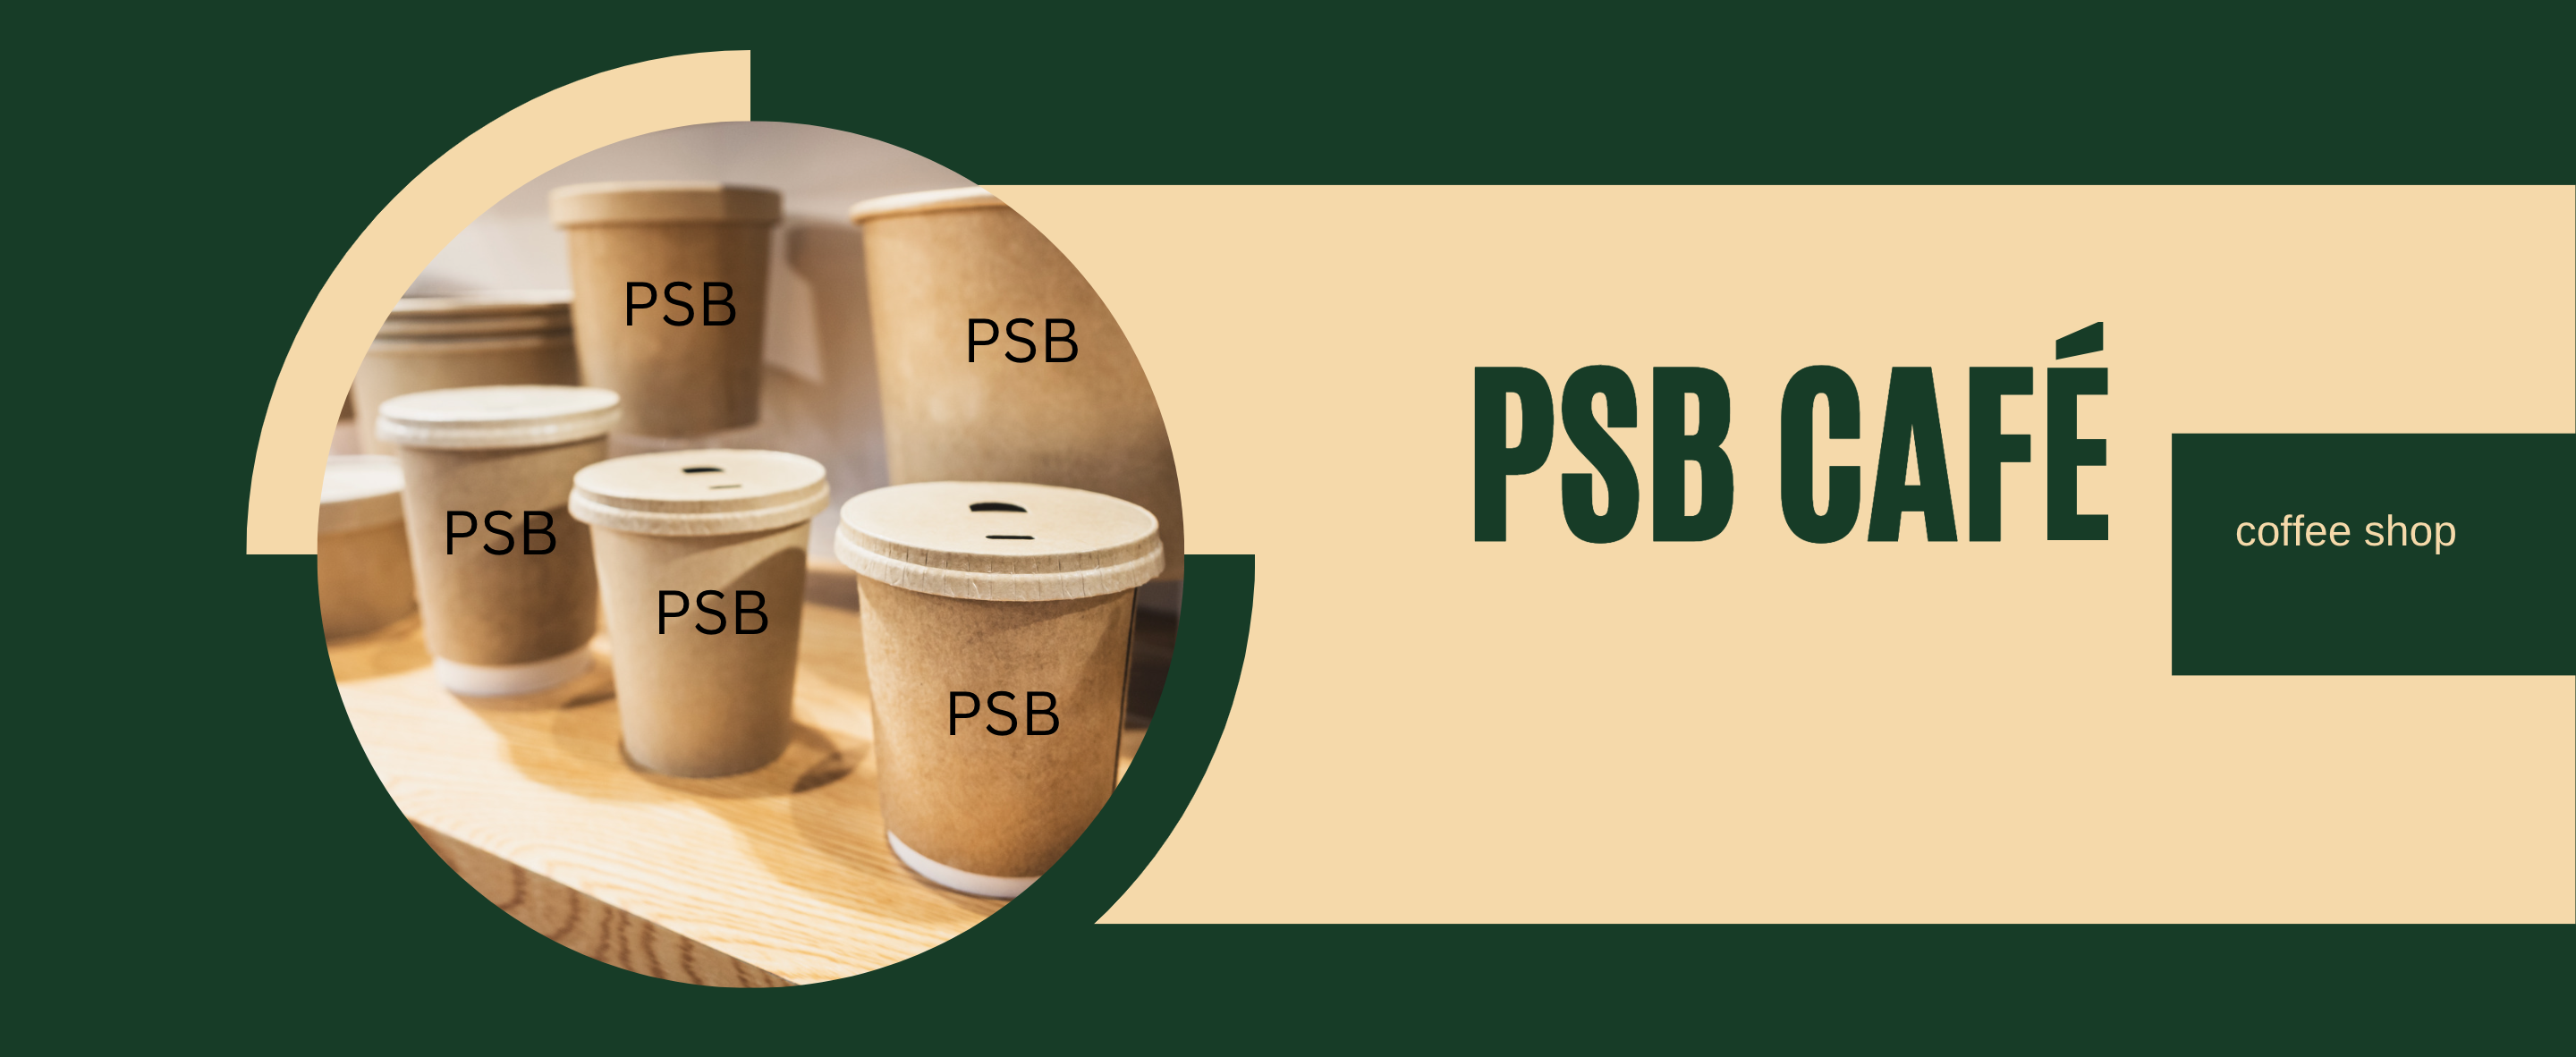 Eco-friendly coffee shop Mississauga: Biodegradable Cups at PSB Cafe